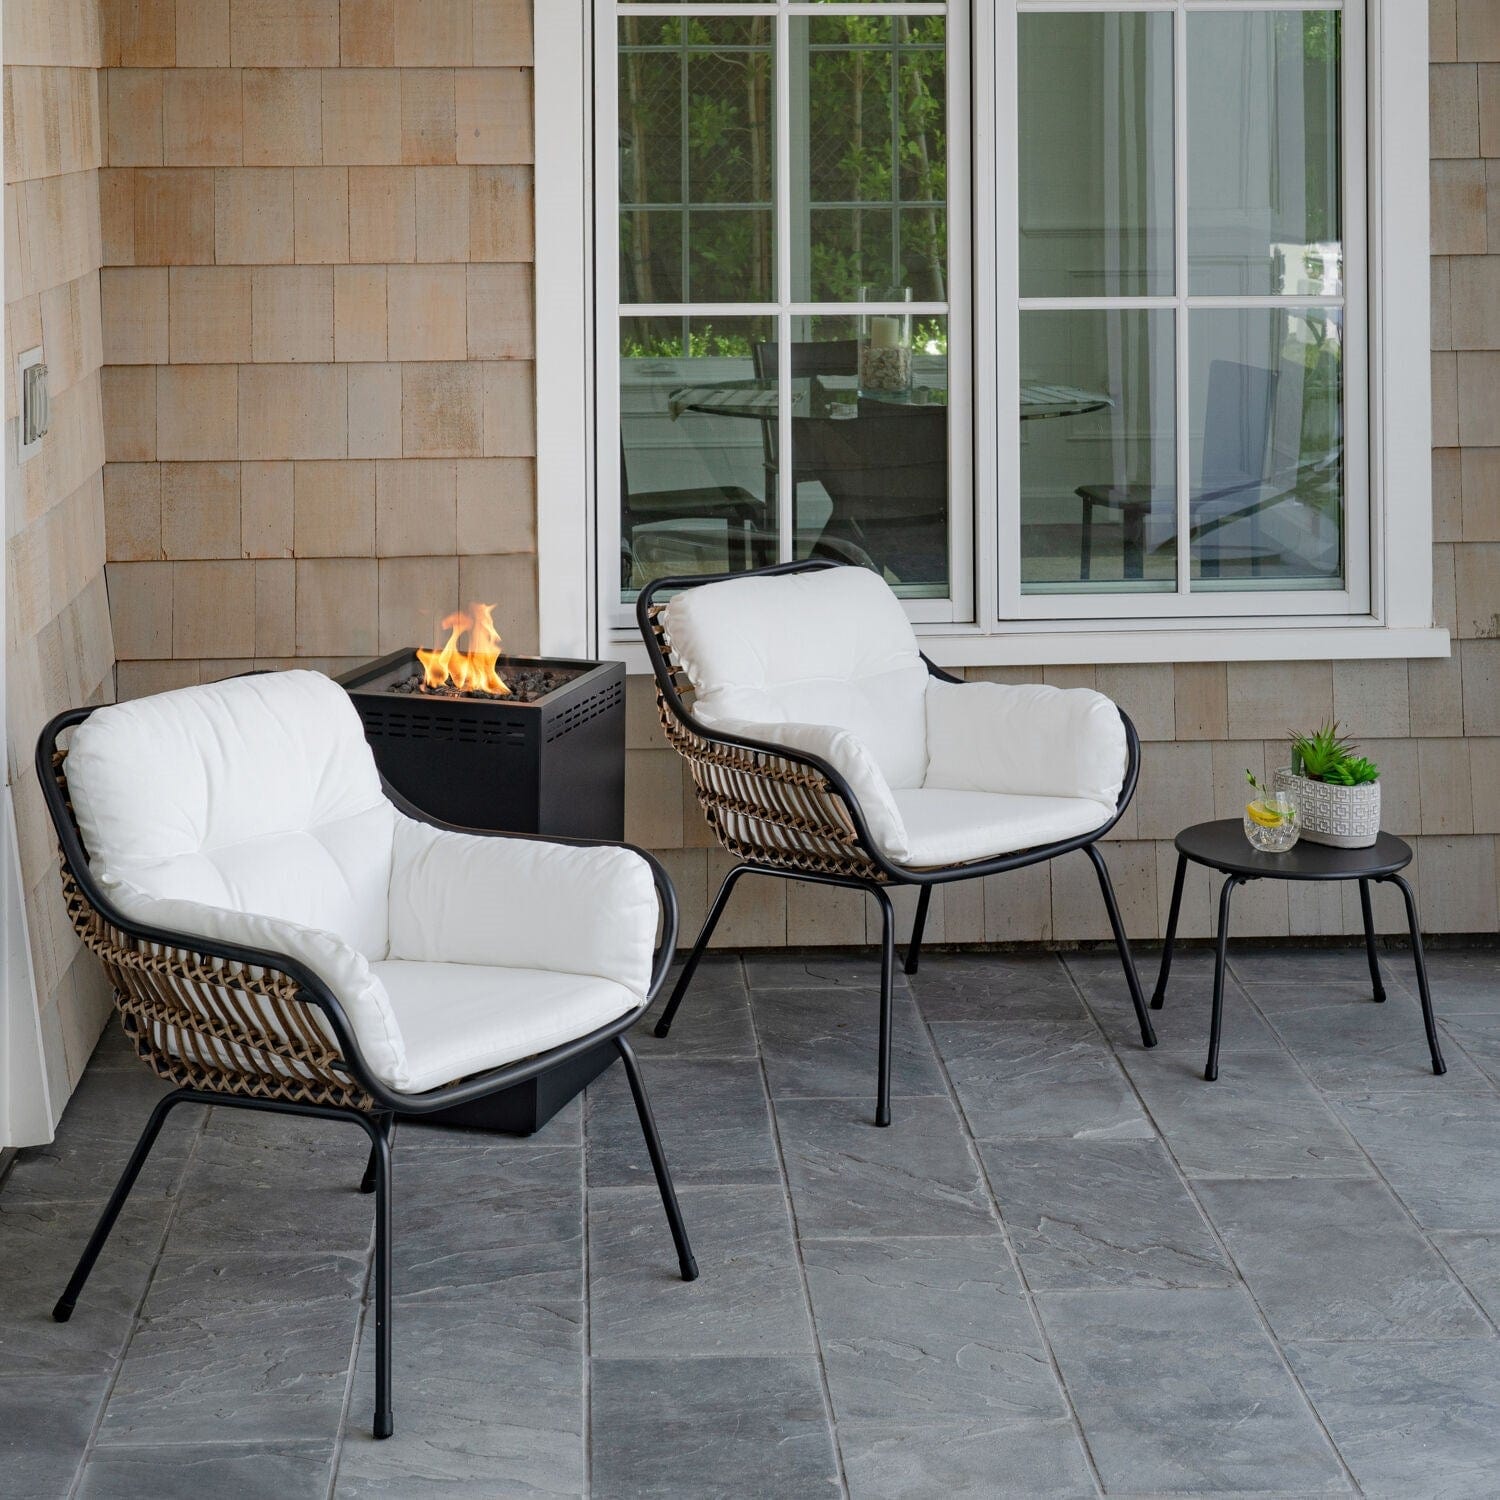 Hanover Fire Pit Chat Set Hanover - Naya 4 Piece Fire Pit: 2 Chairs w/Pillows, Side Tbl, Glass Top Fire Pit | 15.9x15.9 | NAYA4PCGFP-WHT